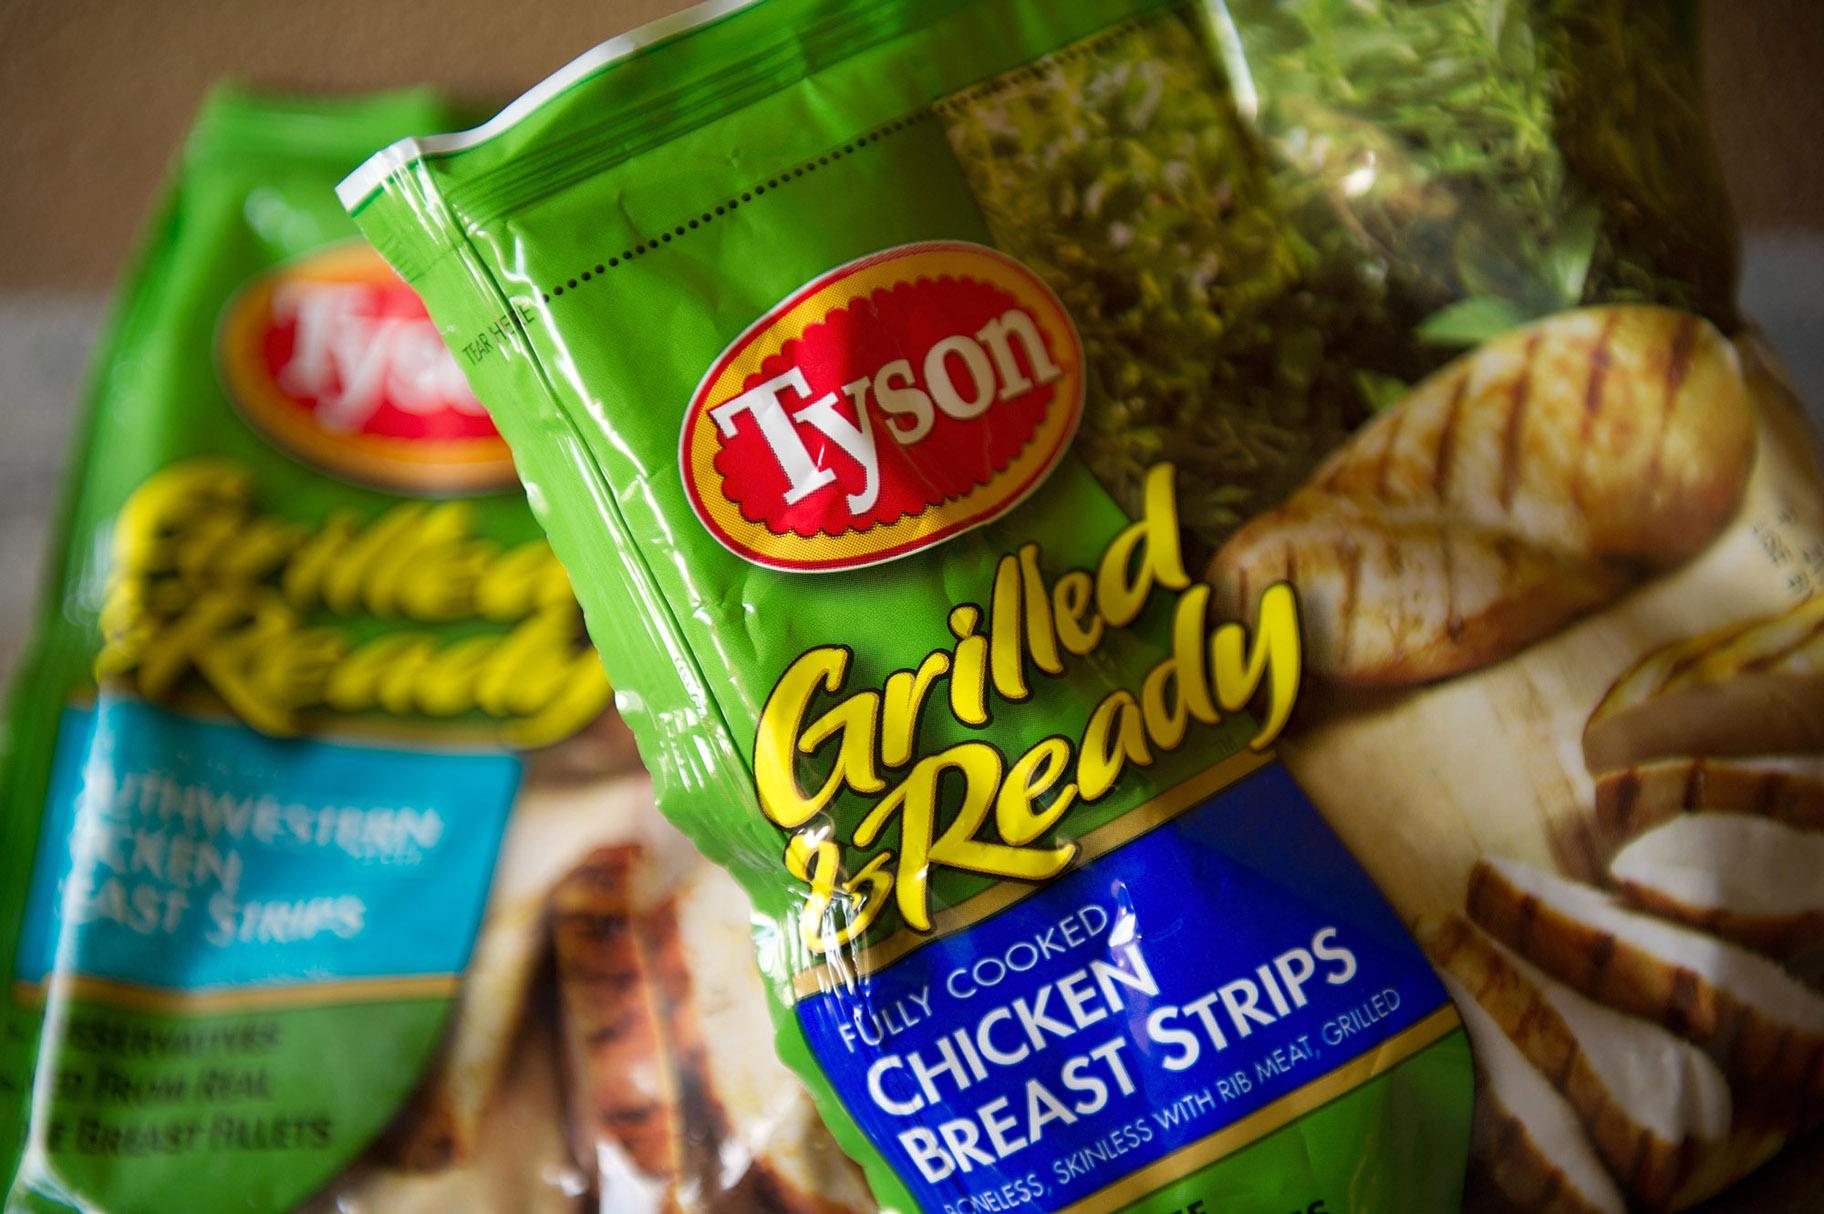 Tyson Foods Inc. is recalling nearly 8.5 million pounds of ready-to-eat chicken products because they may be contaminated with Listeria, the USDA Food Safety and Inspection Service announced June 3. (David Paul Morris / Bloomberg / Getty Image)